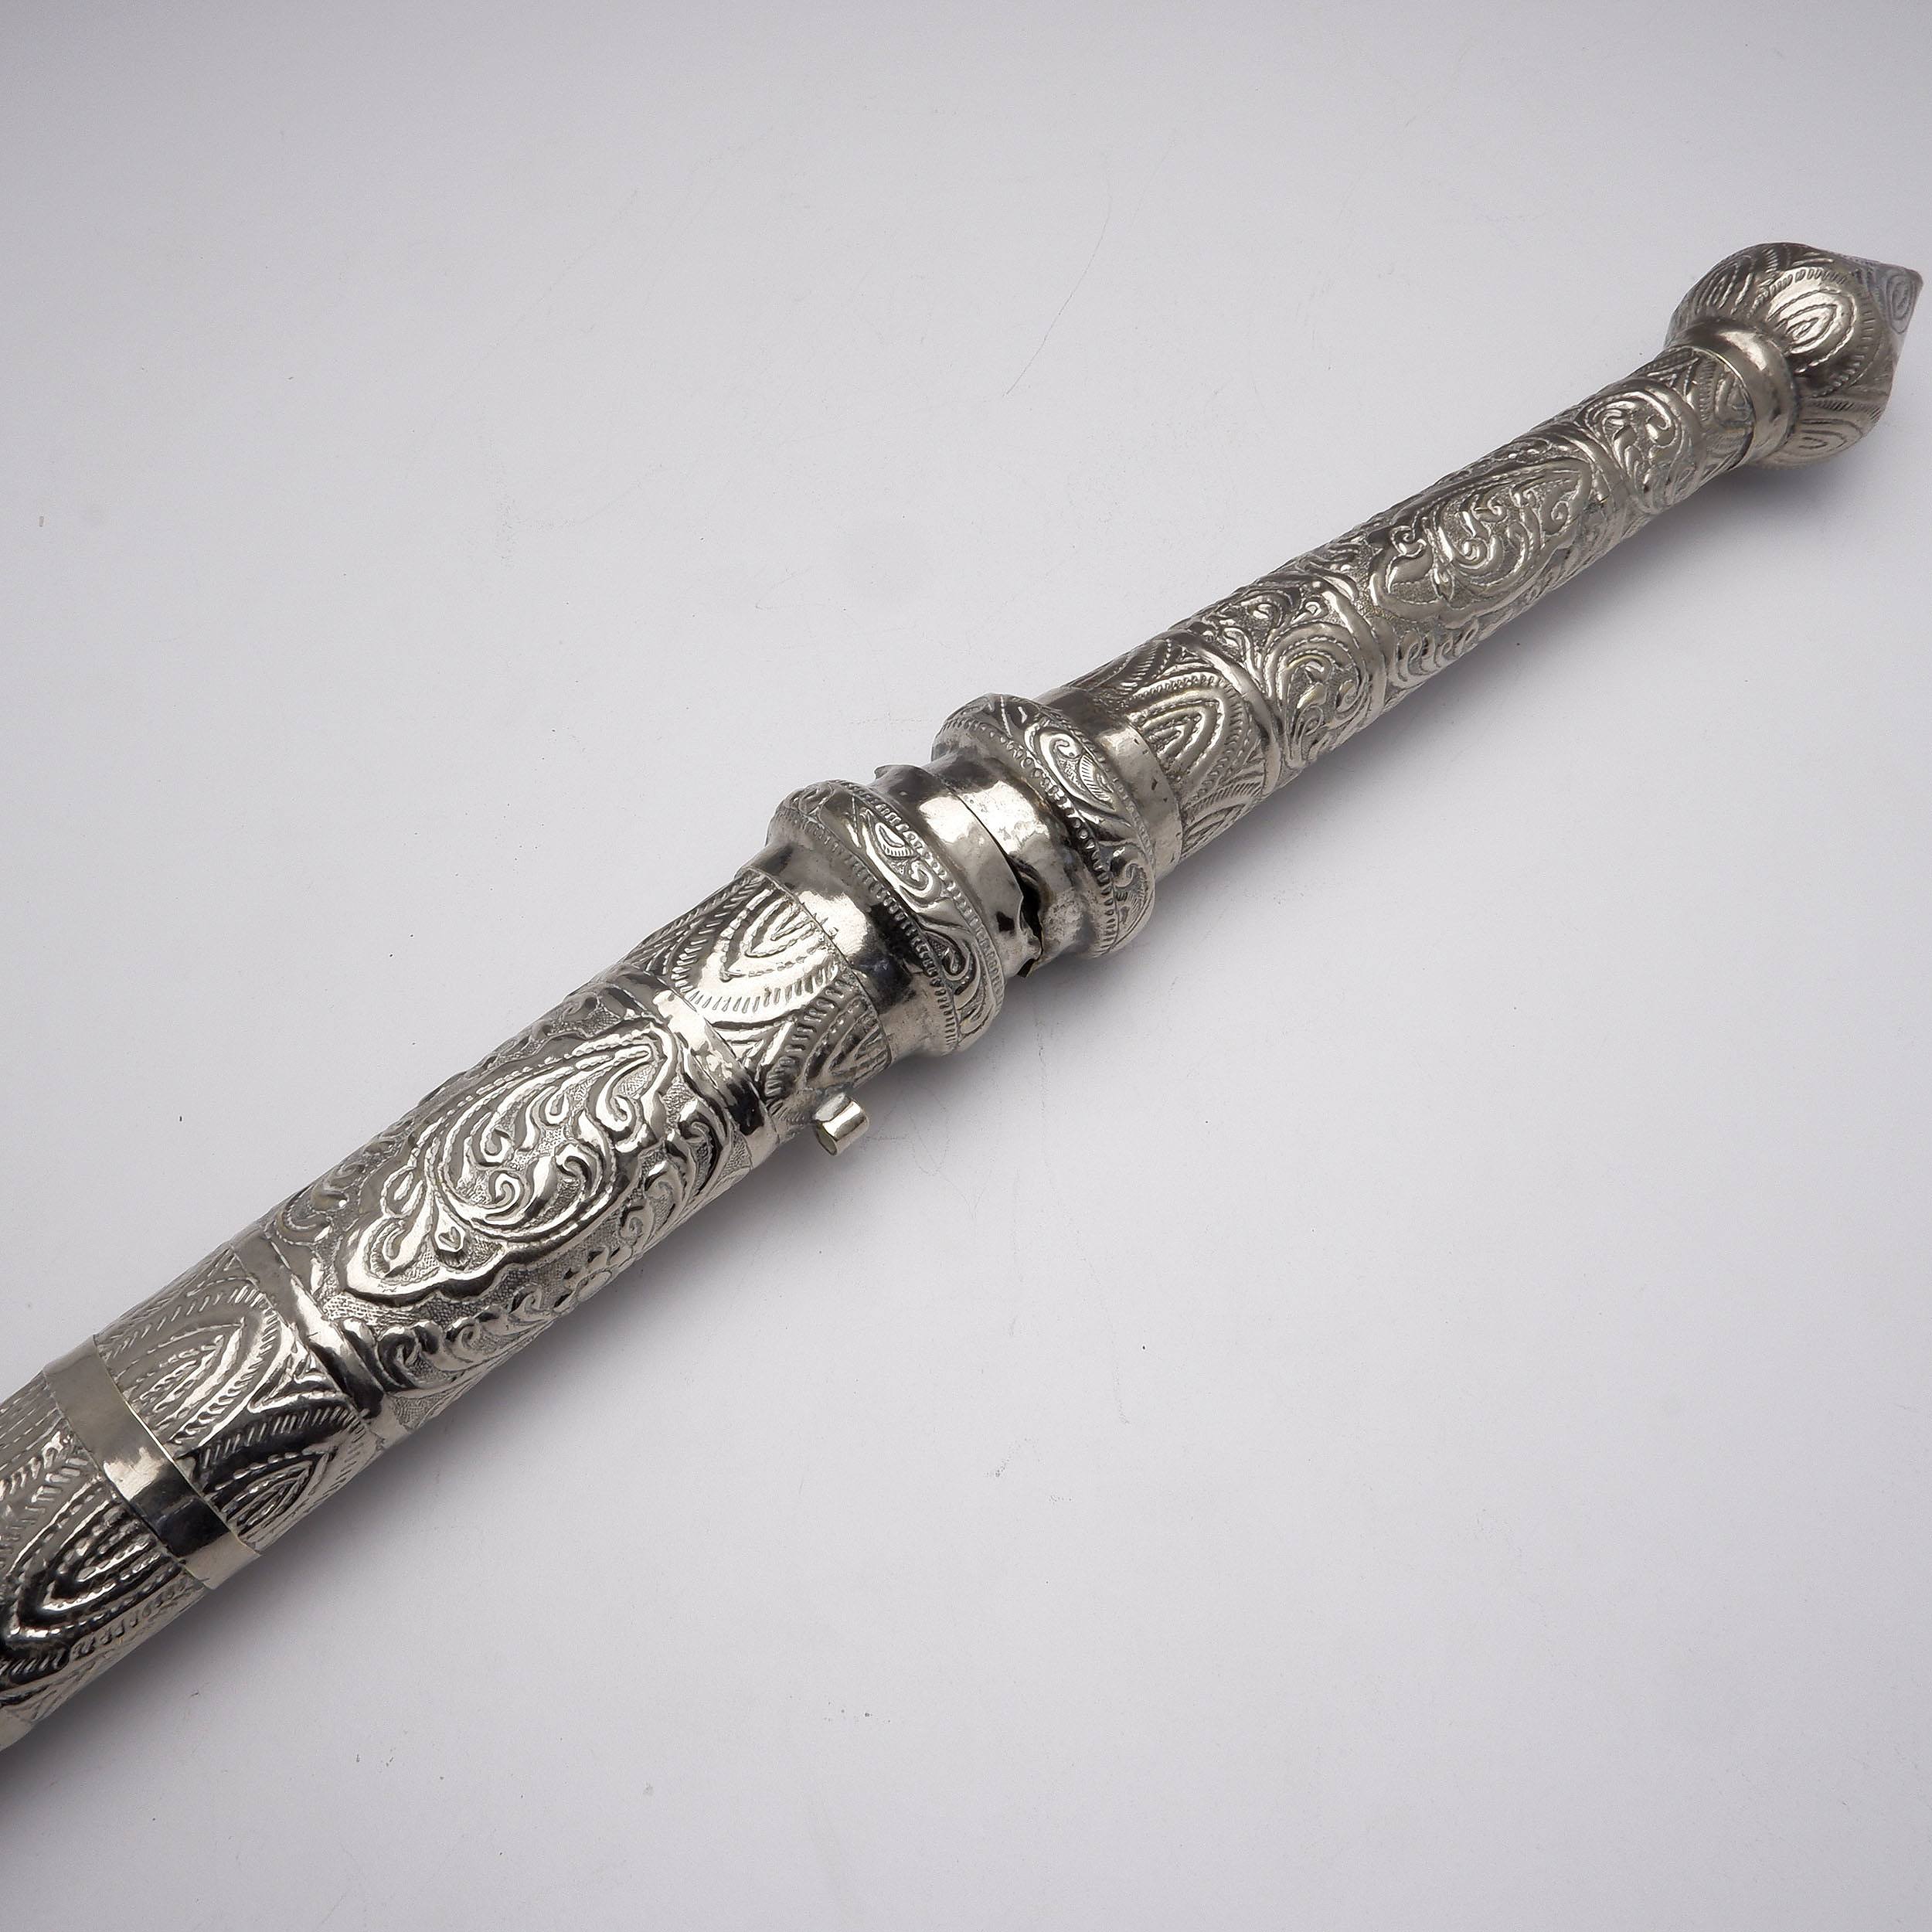 'Burmese Silver Cased Sword, Profusely Repousse Decoration'